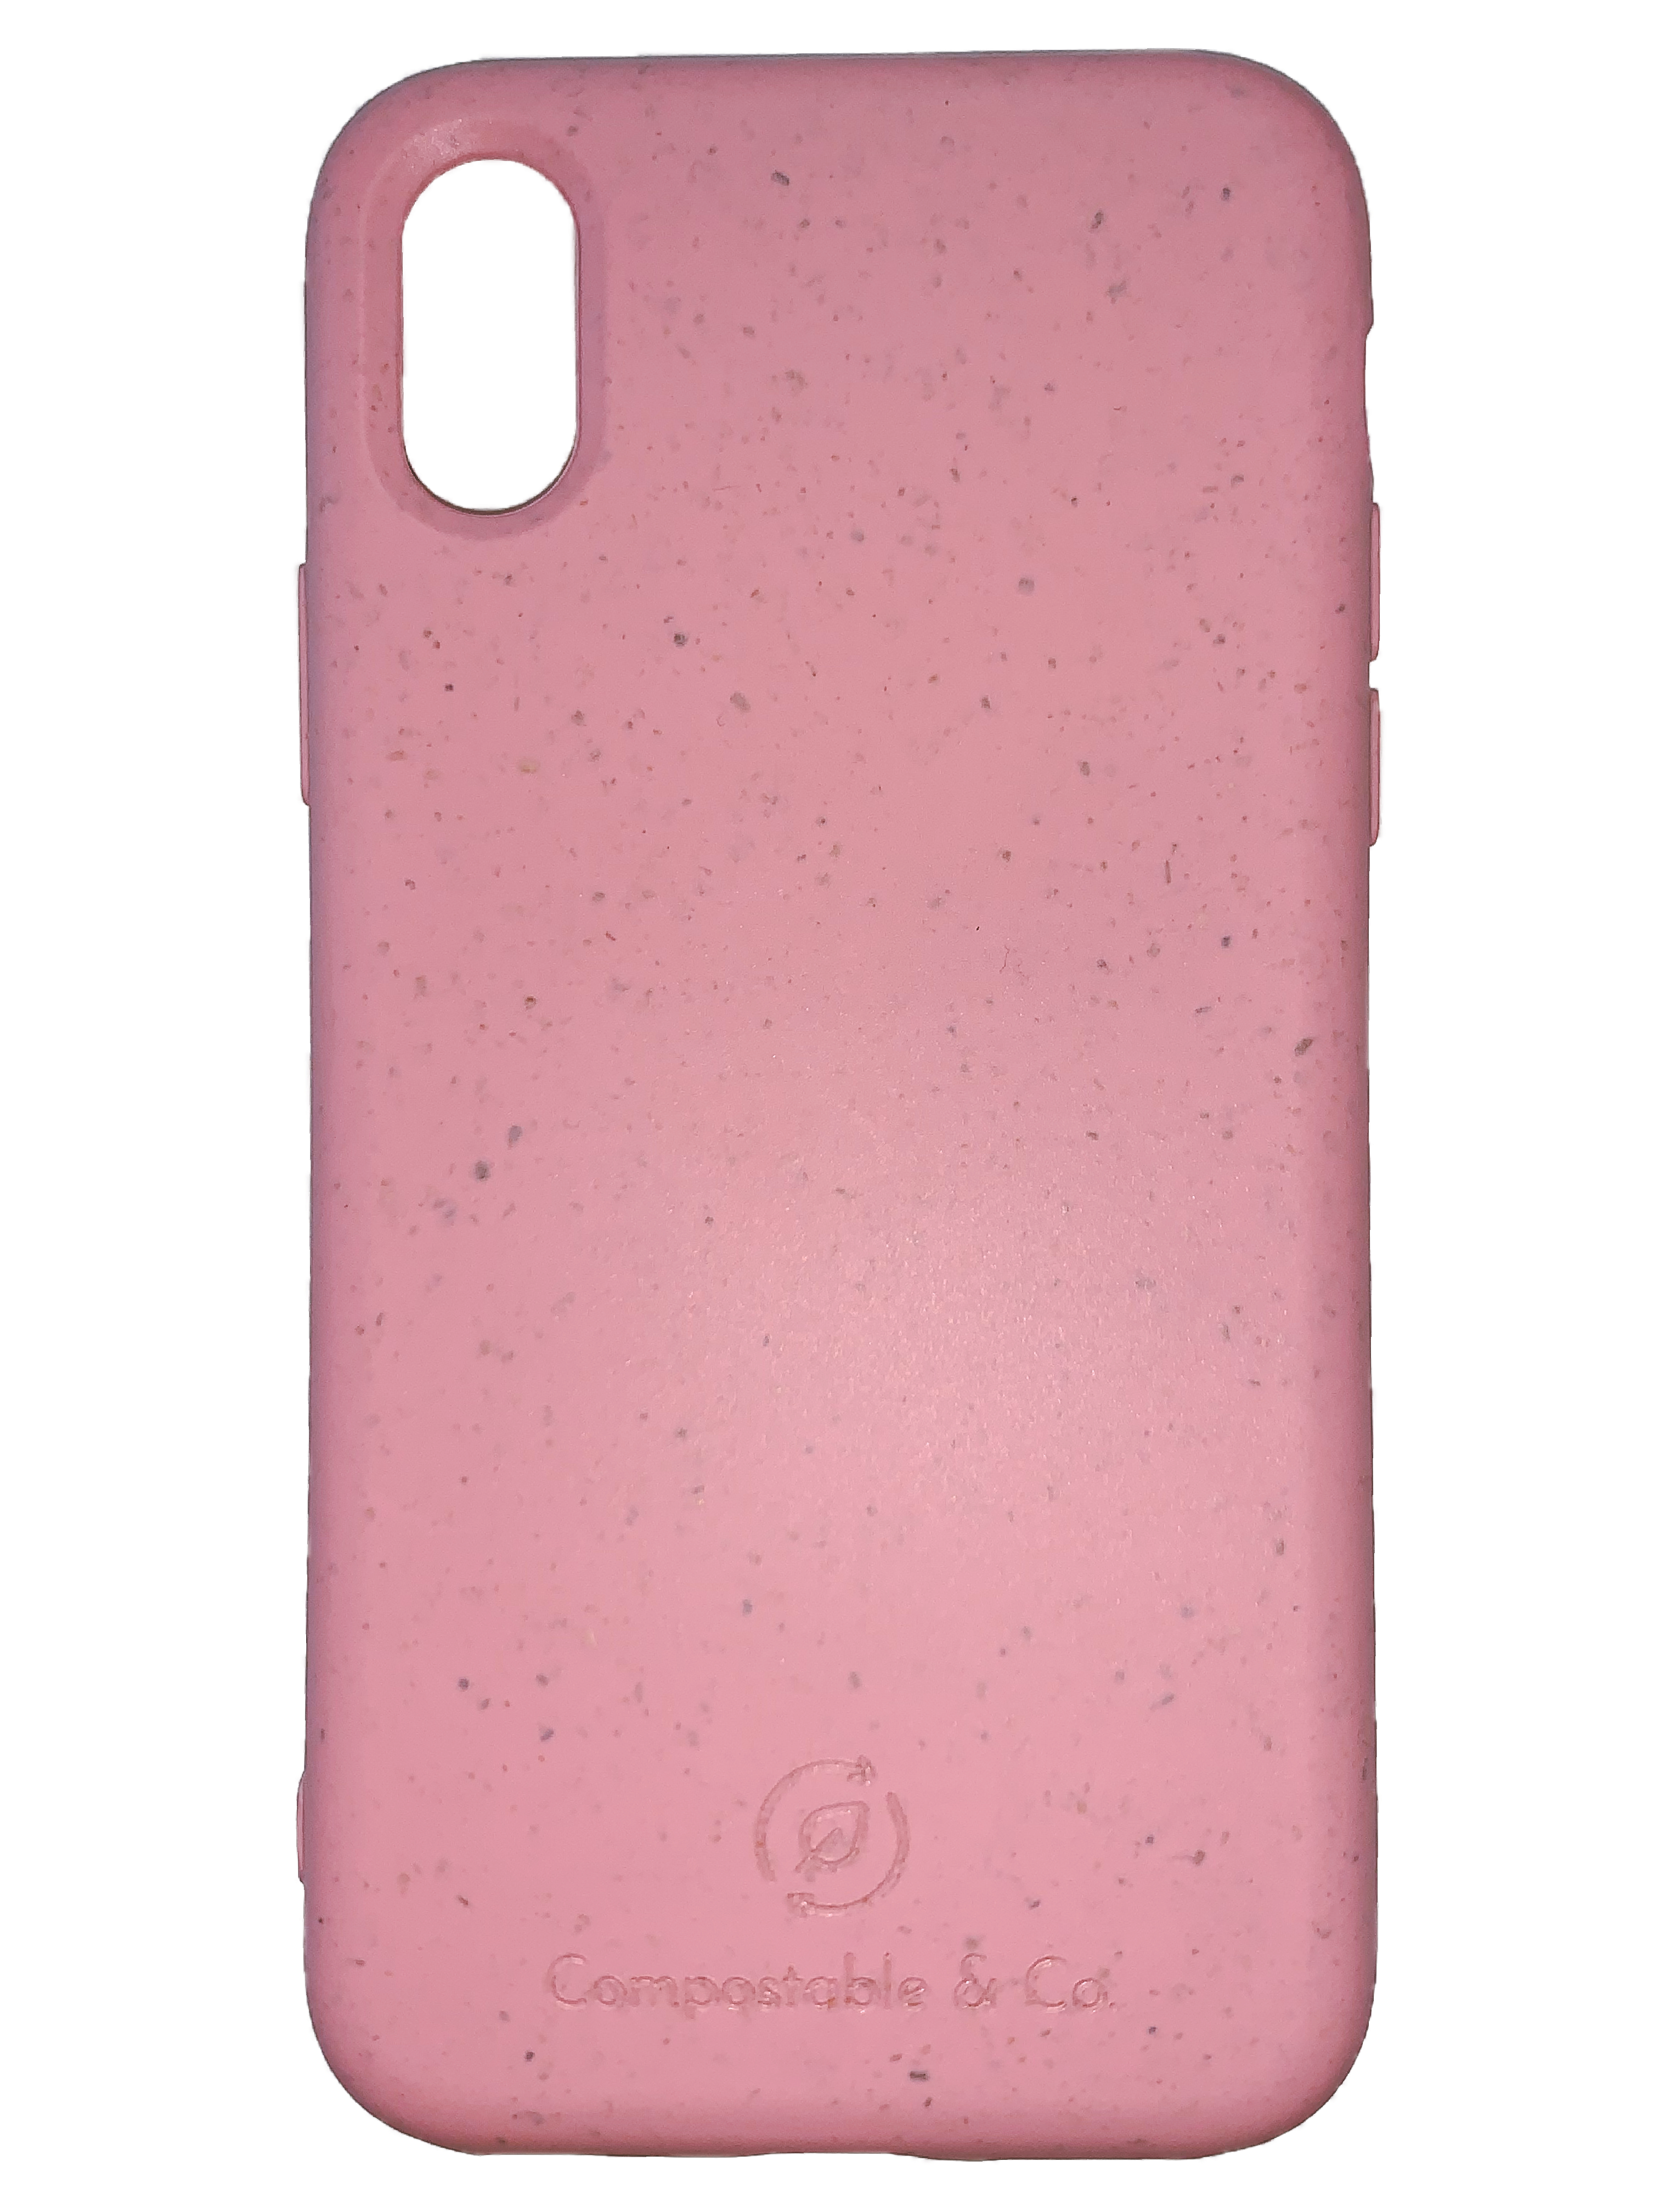 Compostable & Co. iPhone x / xs pink biodegradable phone case